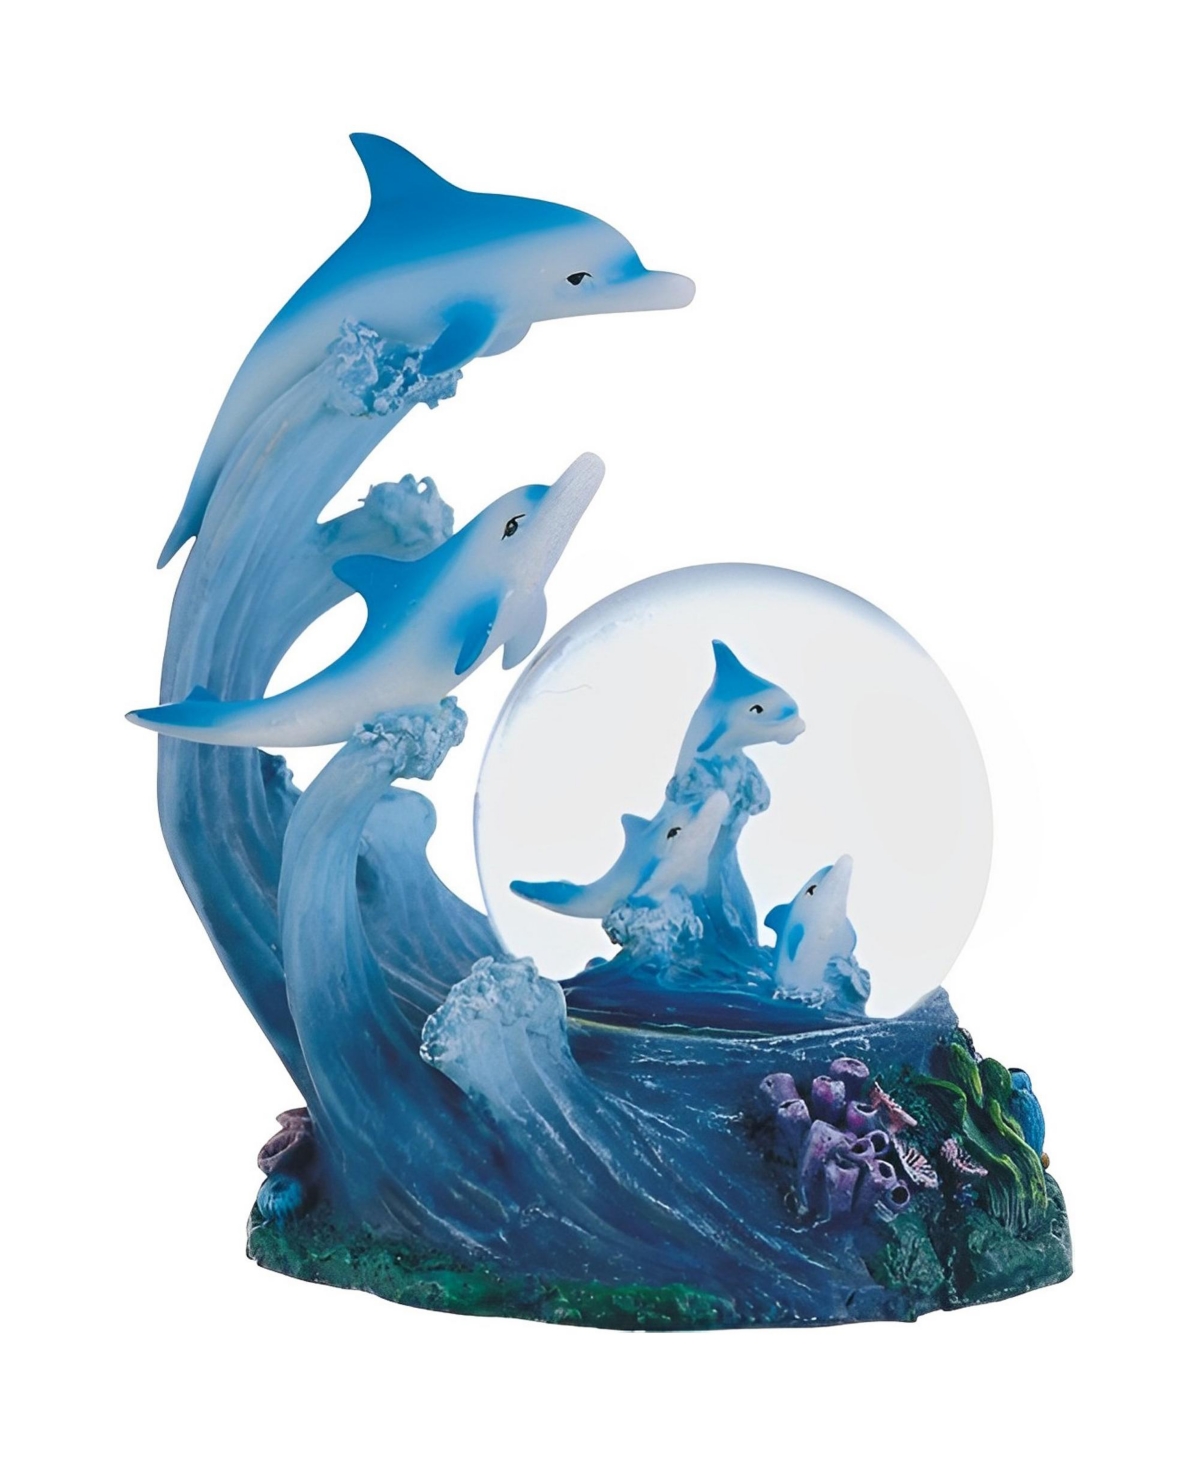 5"H Dolphin Glitter Snow Globe Figurine Home Decor Perfect Gift for House Warming, Holidays and Birthdays - Multicolor